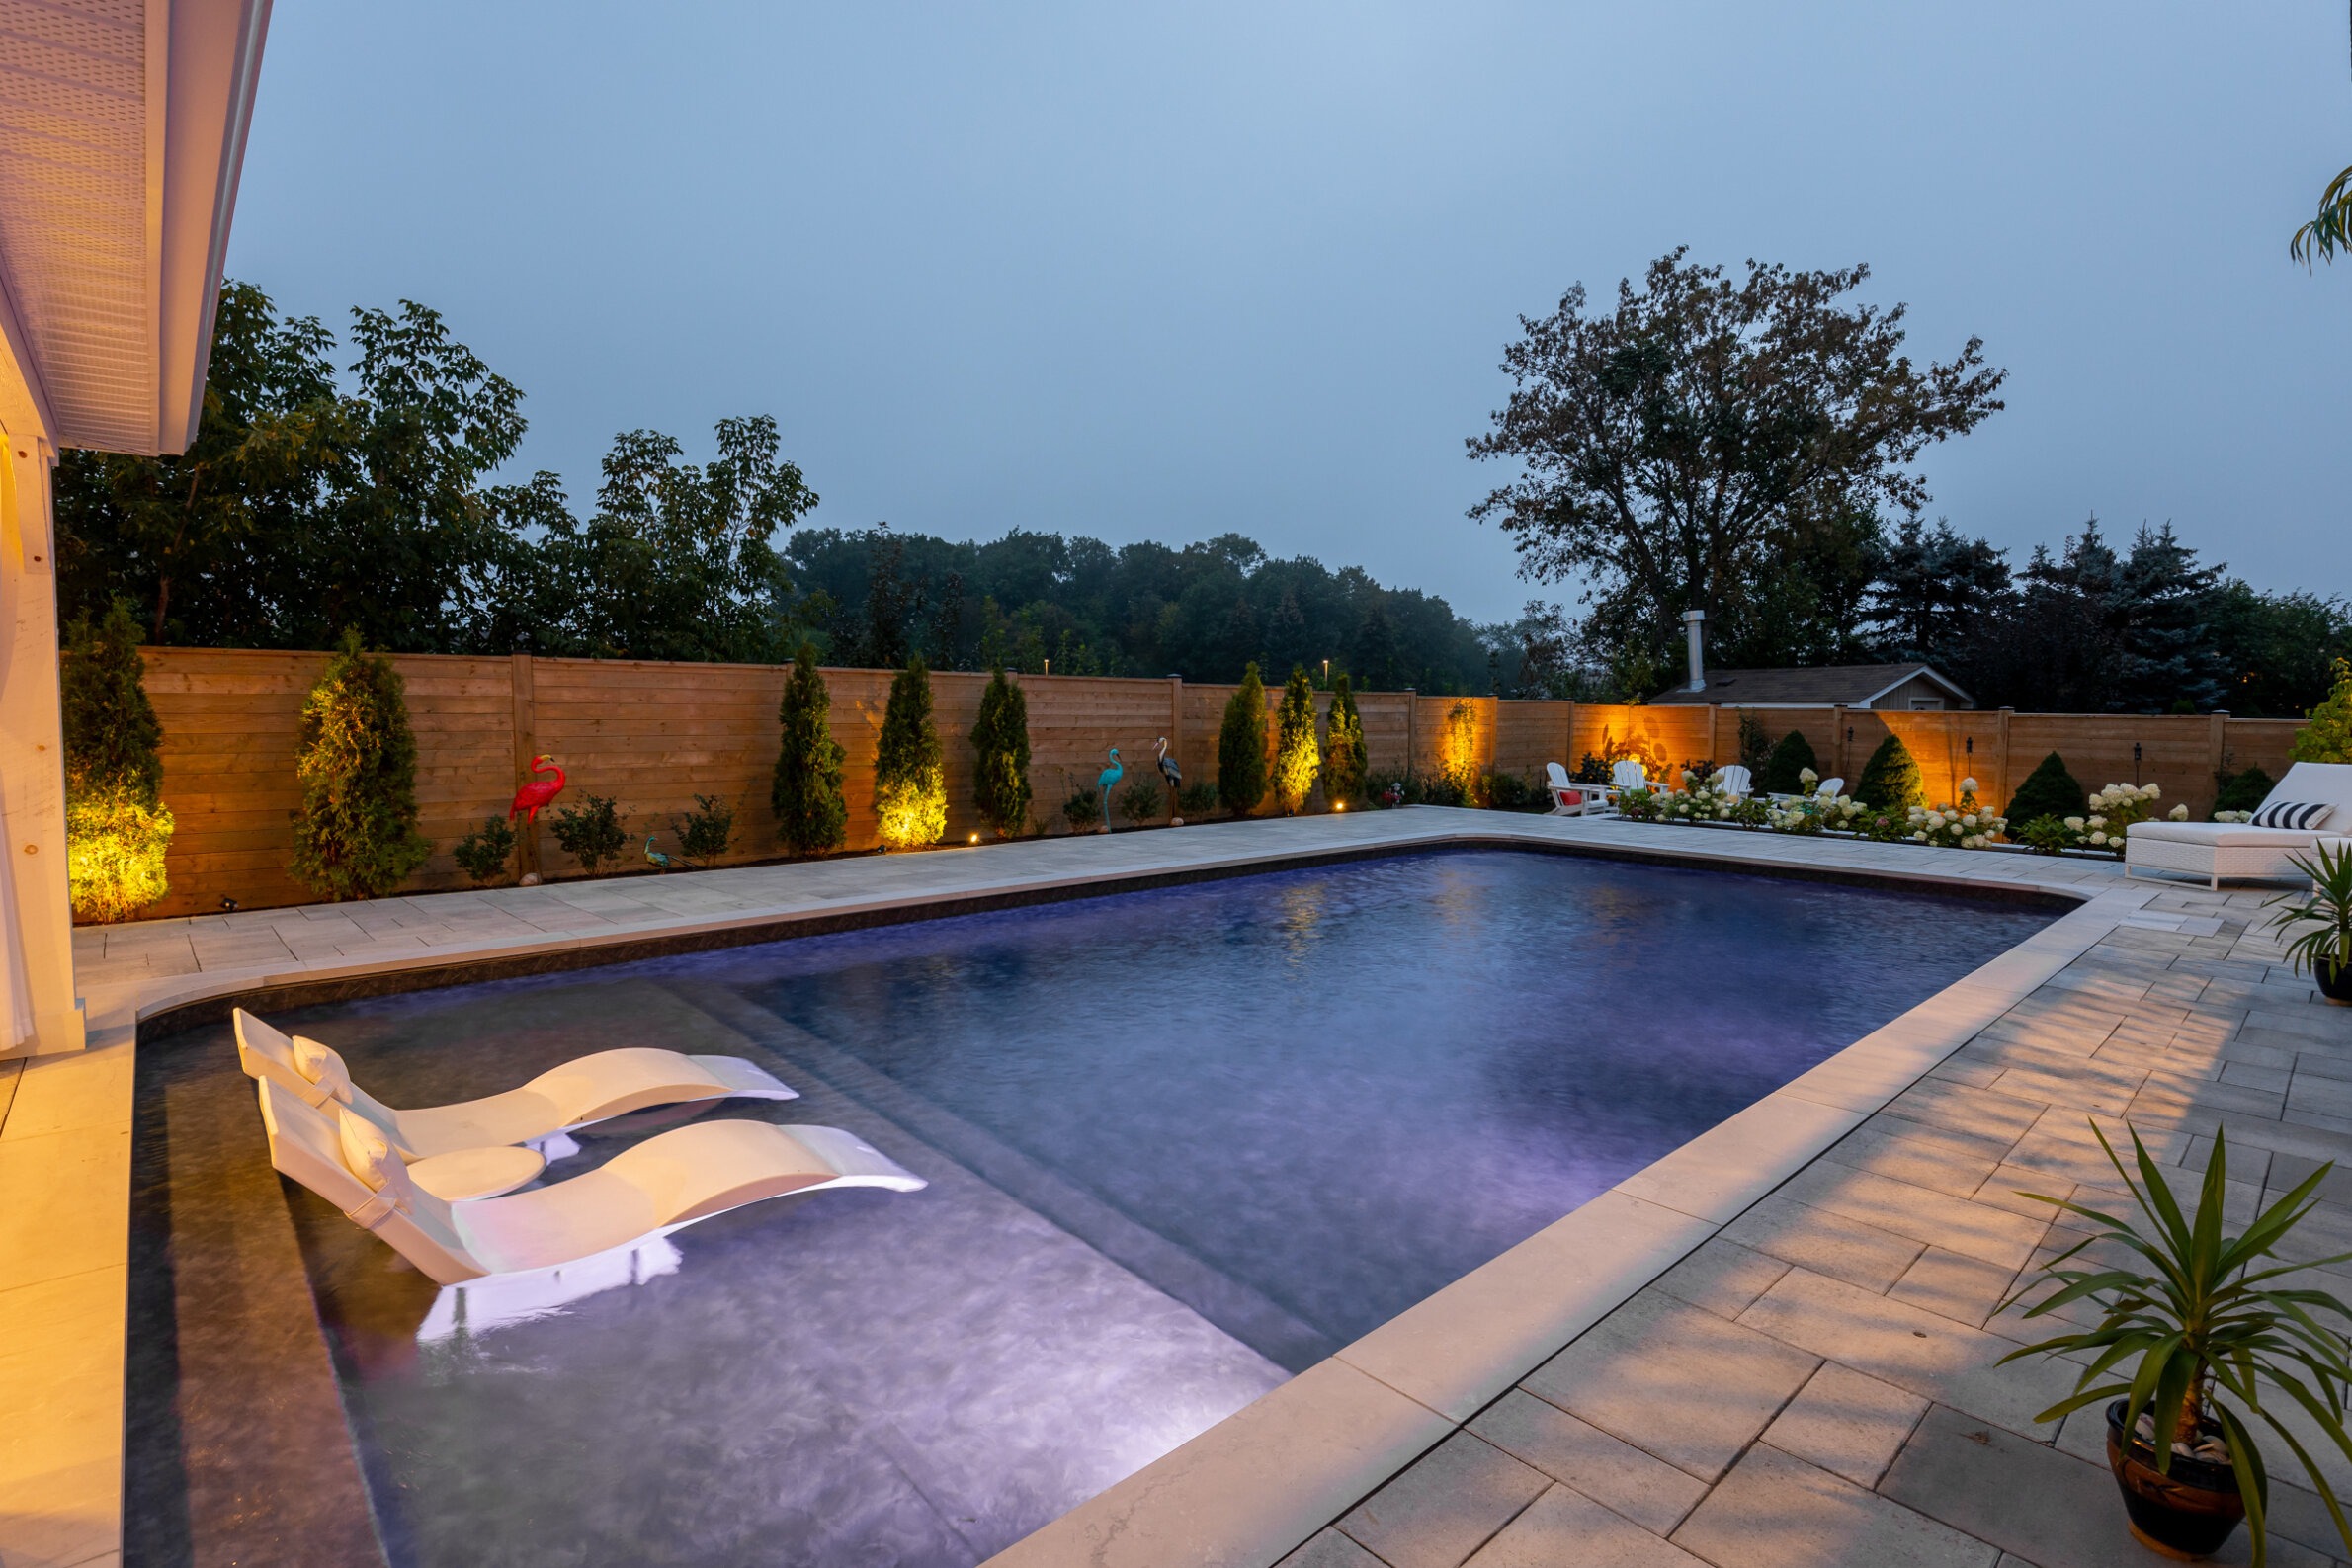 An outdoor swimming pool with evening lighting, surrounded by a privacy fence and landscaping, reflects the sky at twilight. A floating lounger sits on the water.